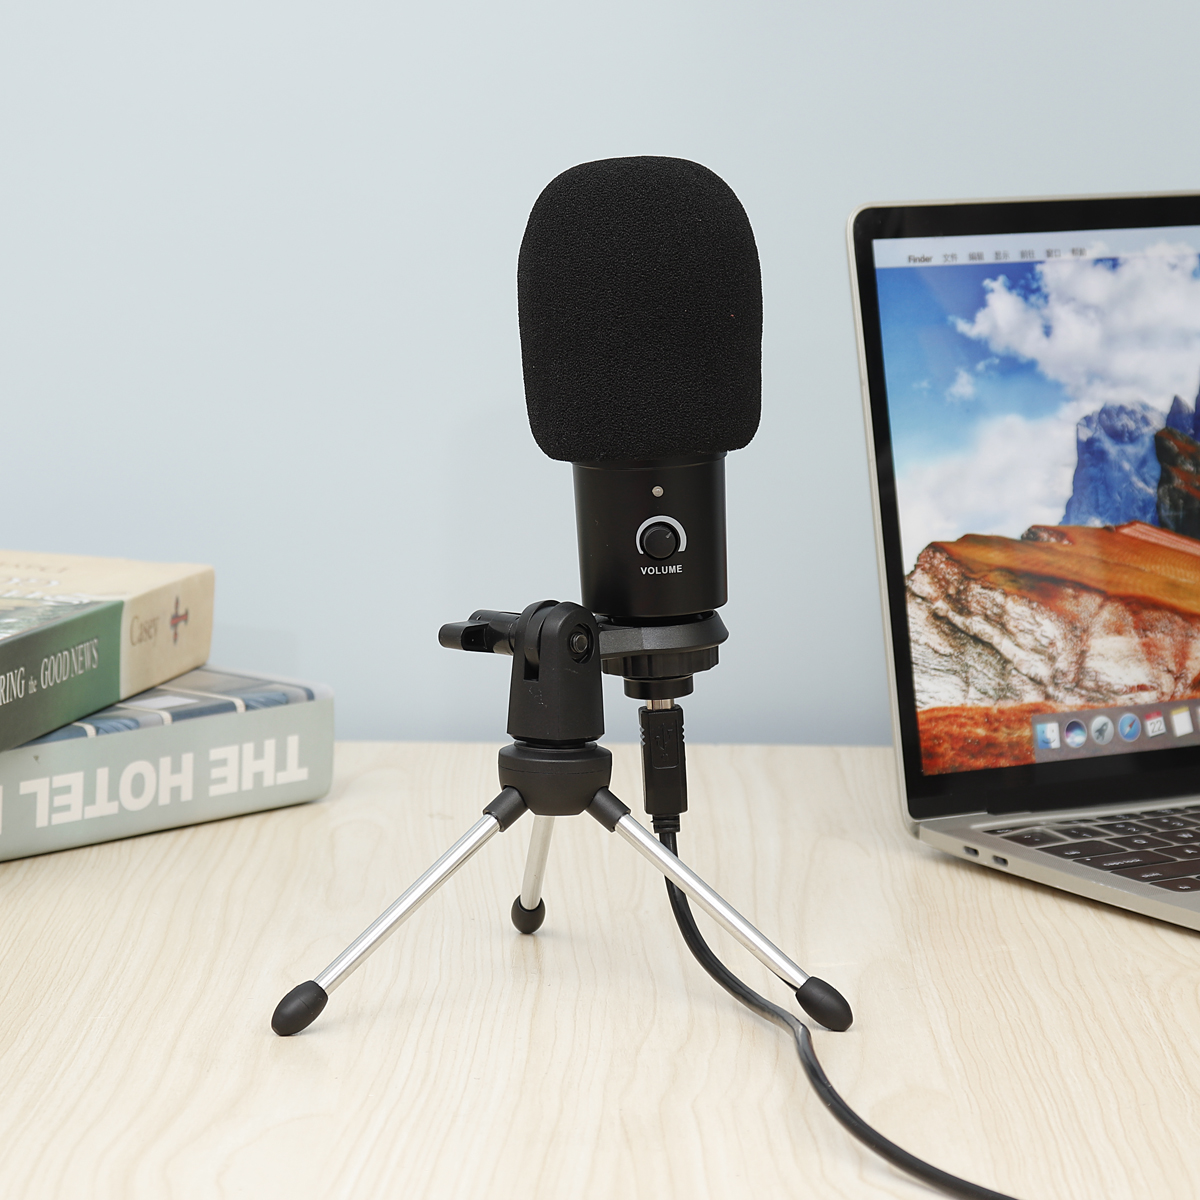 Wired-USB-Microphone-with-Tripod-for-Computer-Windows-for-Mac-PC-Live-Broadcast-Video-Conferencing-A-1866200-2